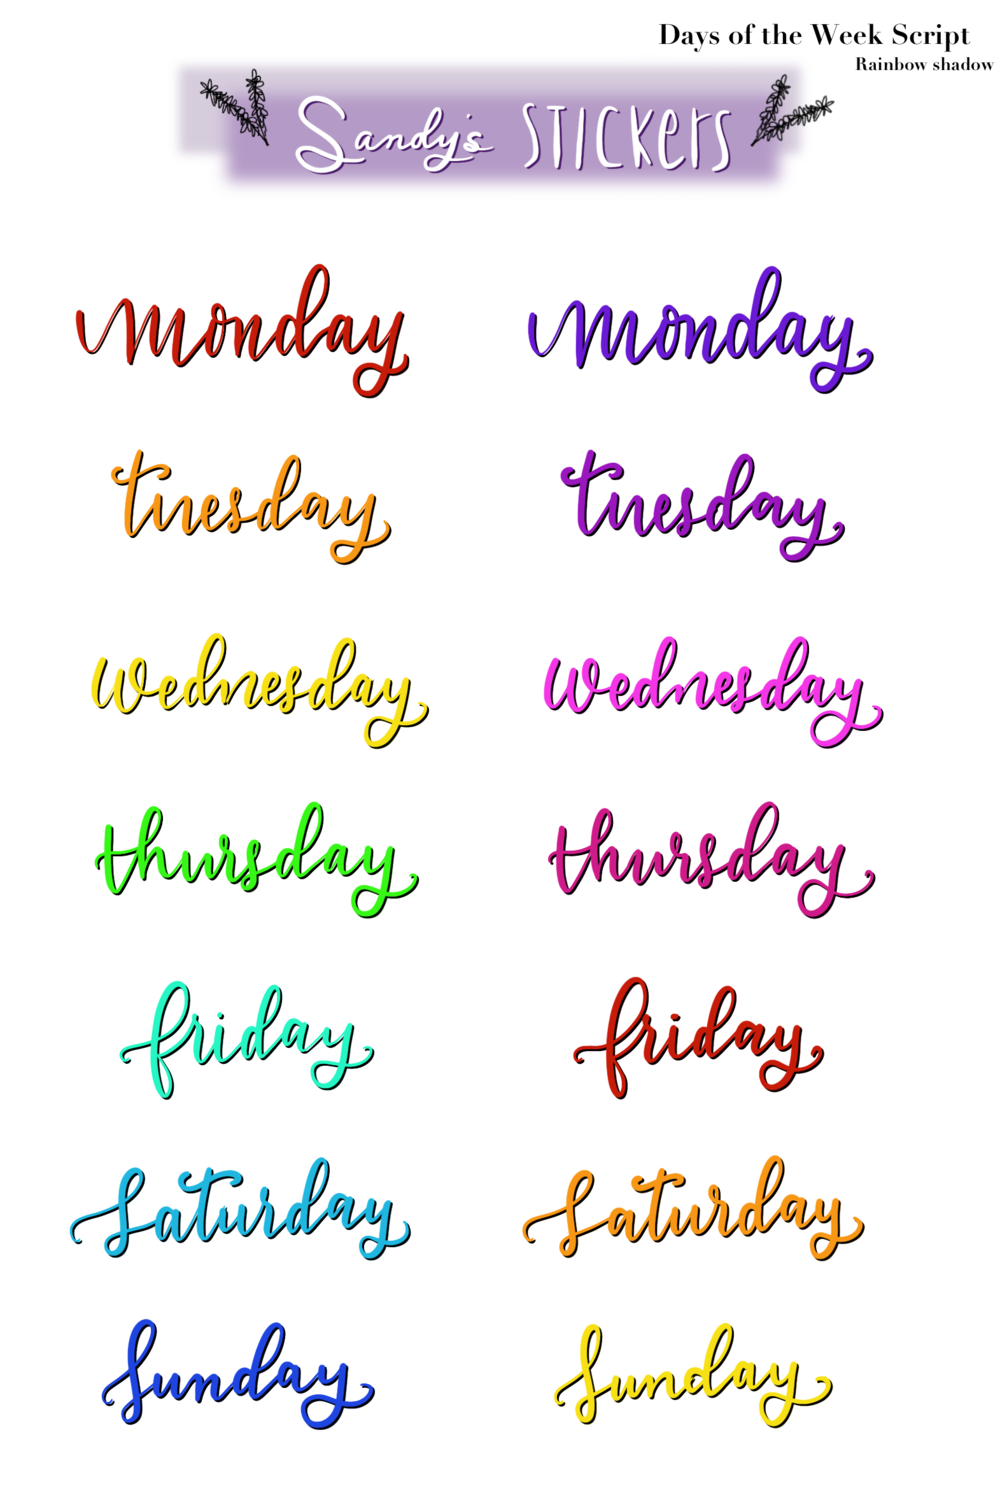 Days Of The Week Script Stickers